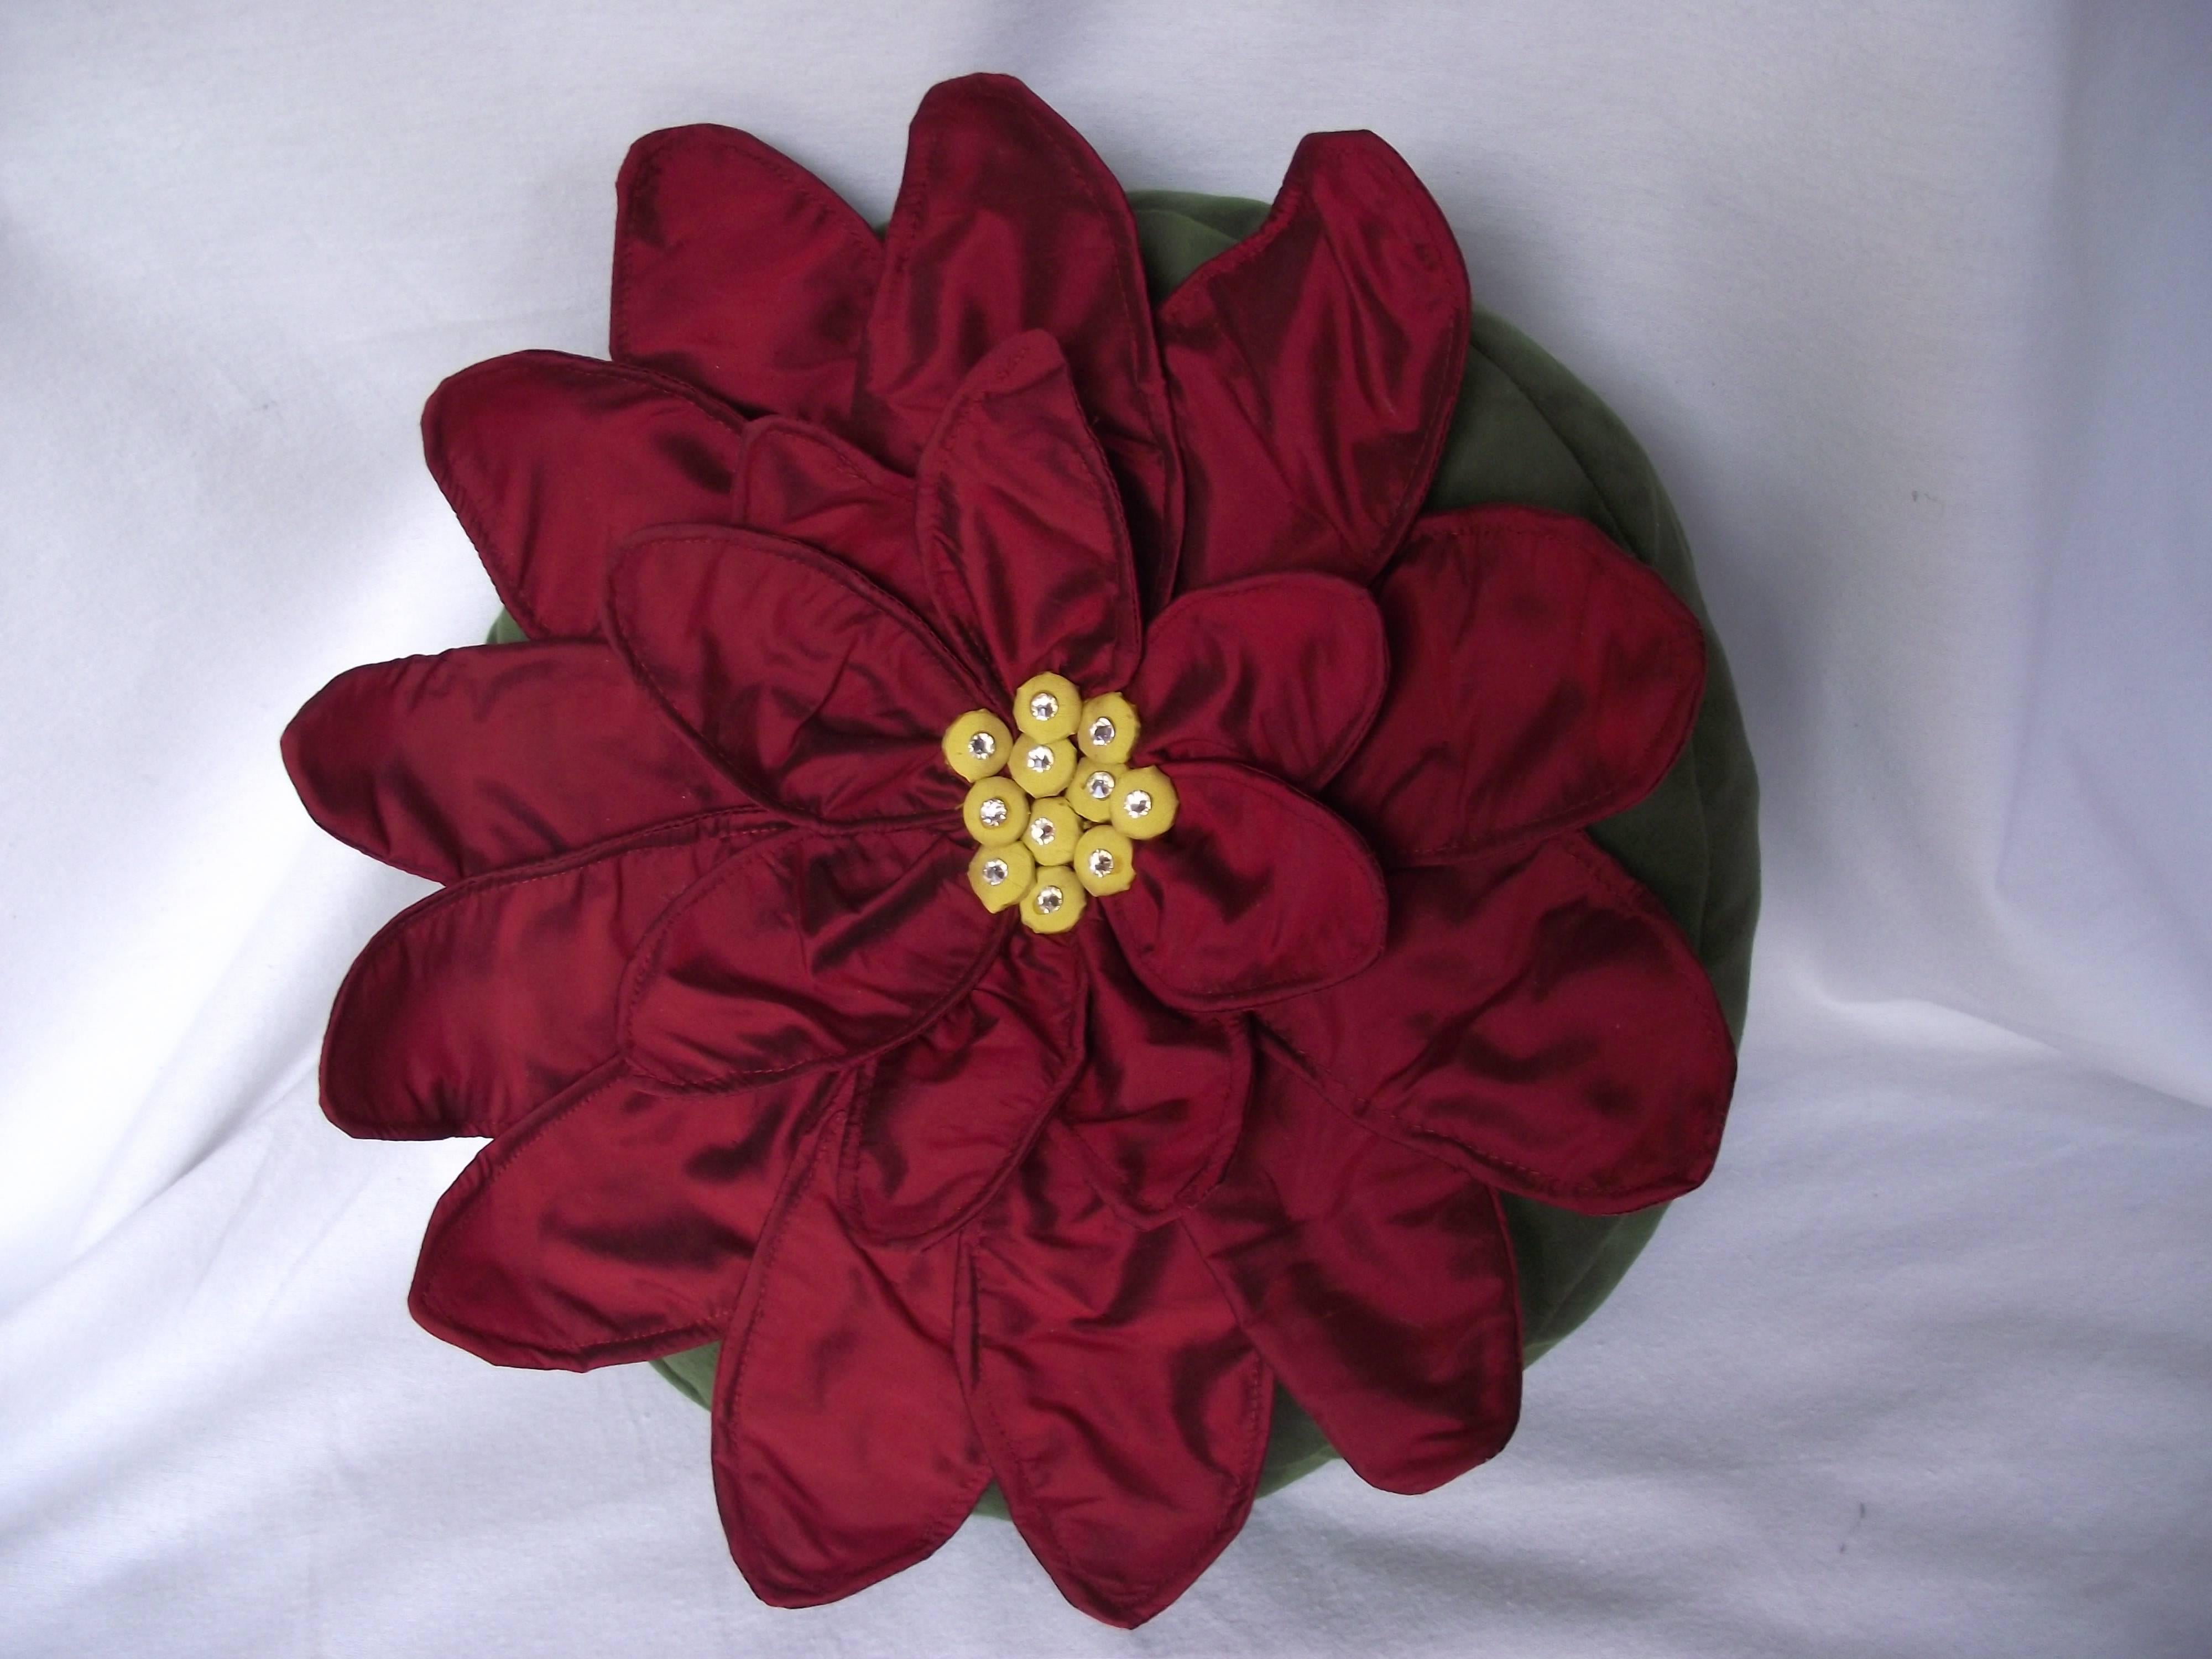 This new pillow design from Gantt Design Studio is called Red Shasta Daisy. Like the others each flower petal is individually wired. The Daisy is made of Red Silk and the pillow is made of green velvet. It is limited to five of each pillow. In truth